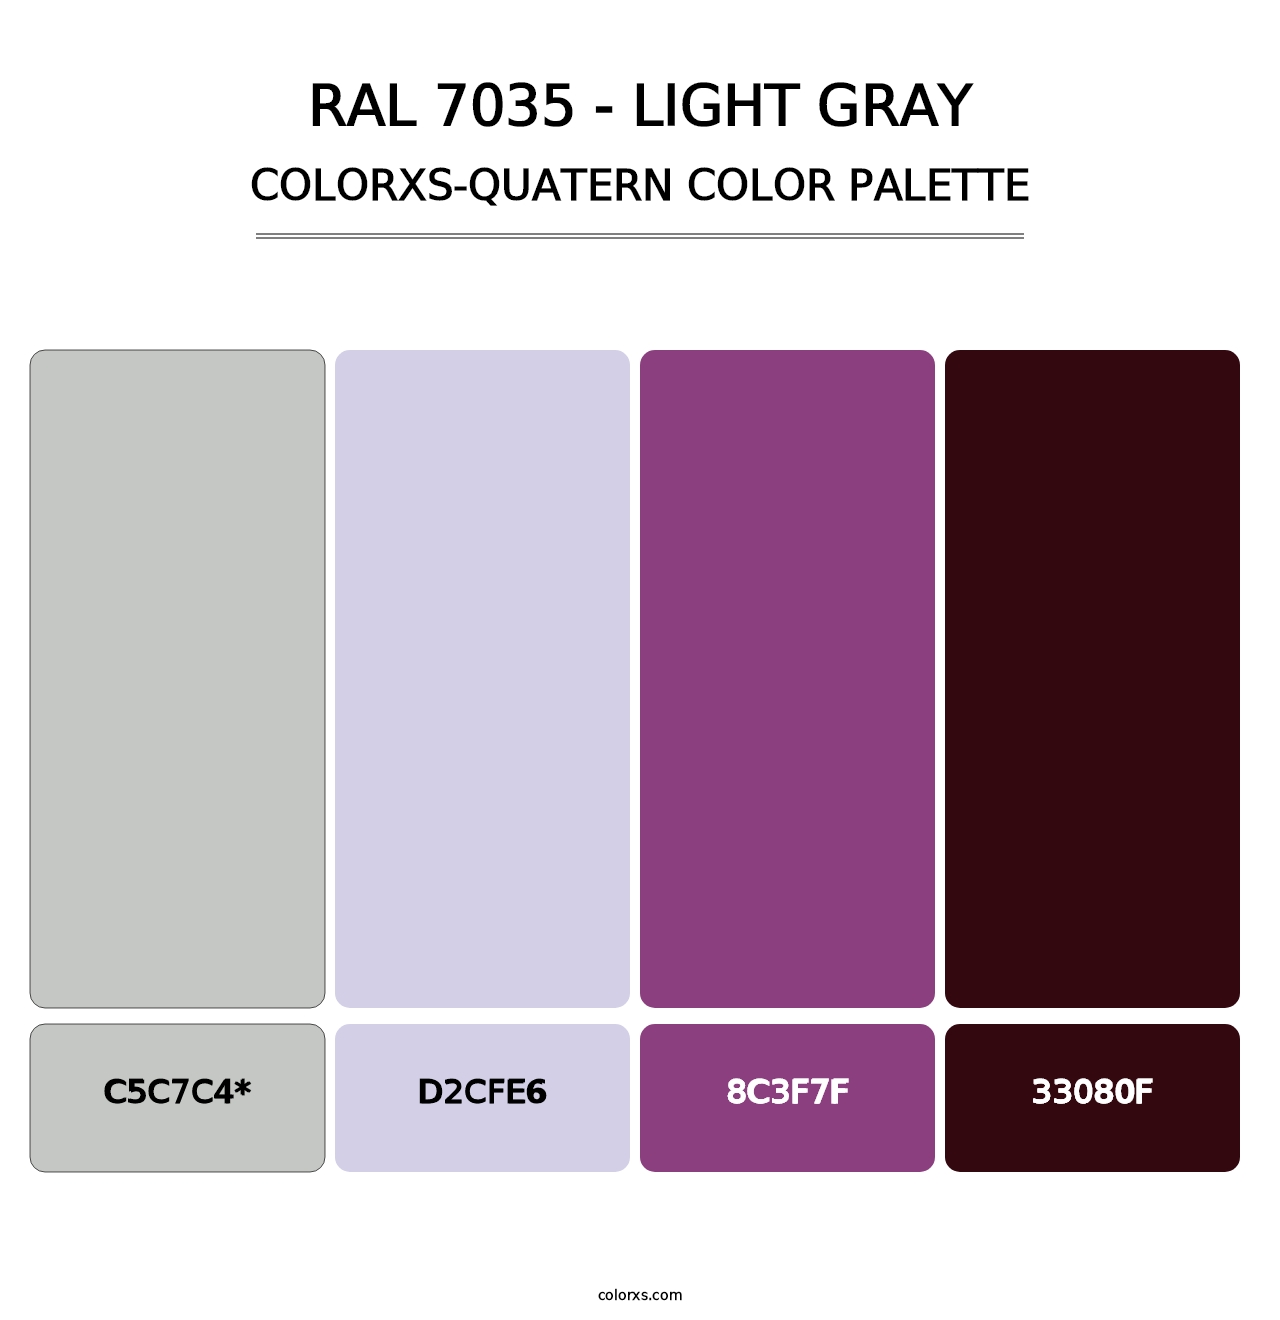 RAL 7035 - Light Gray - Colorxs Quatern Palette